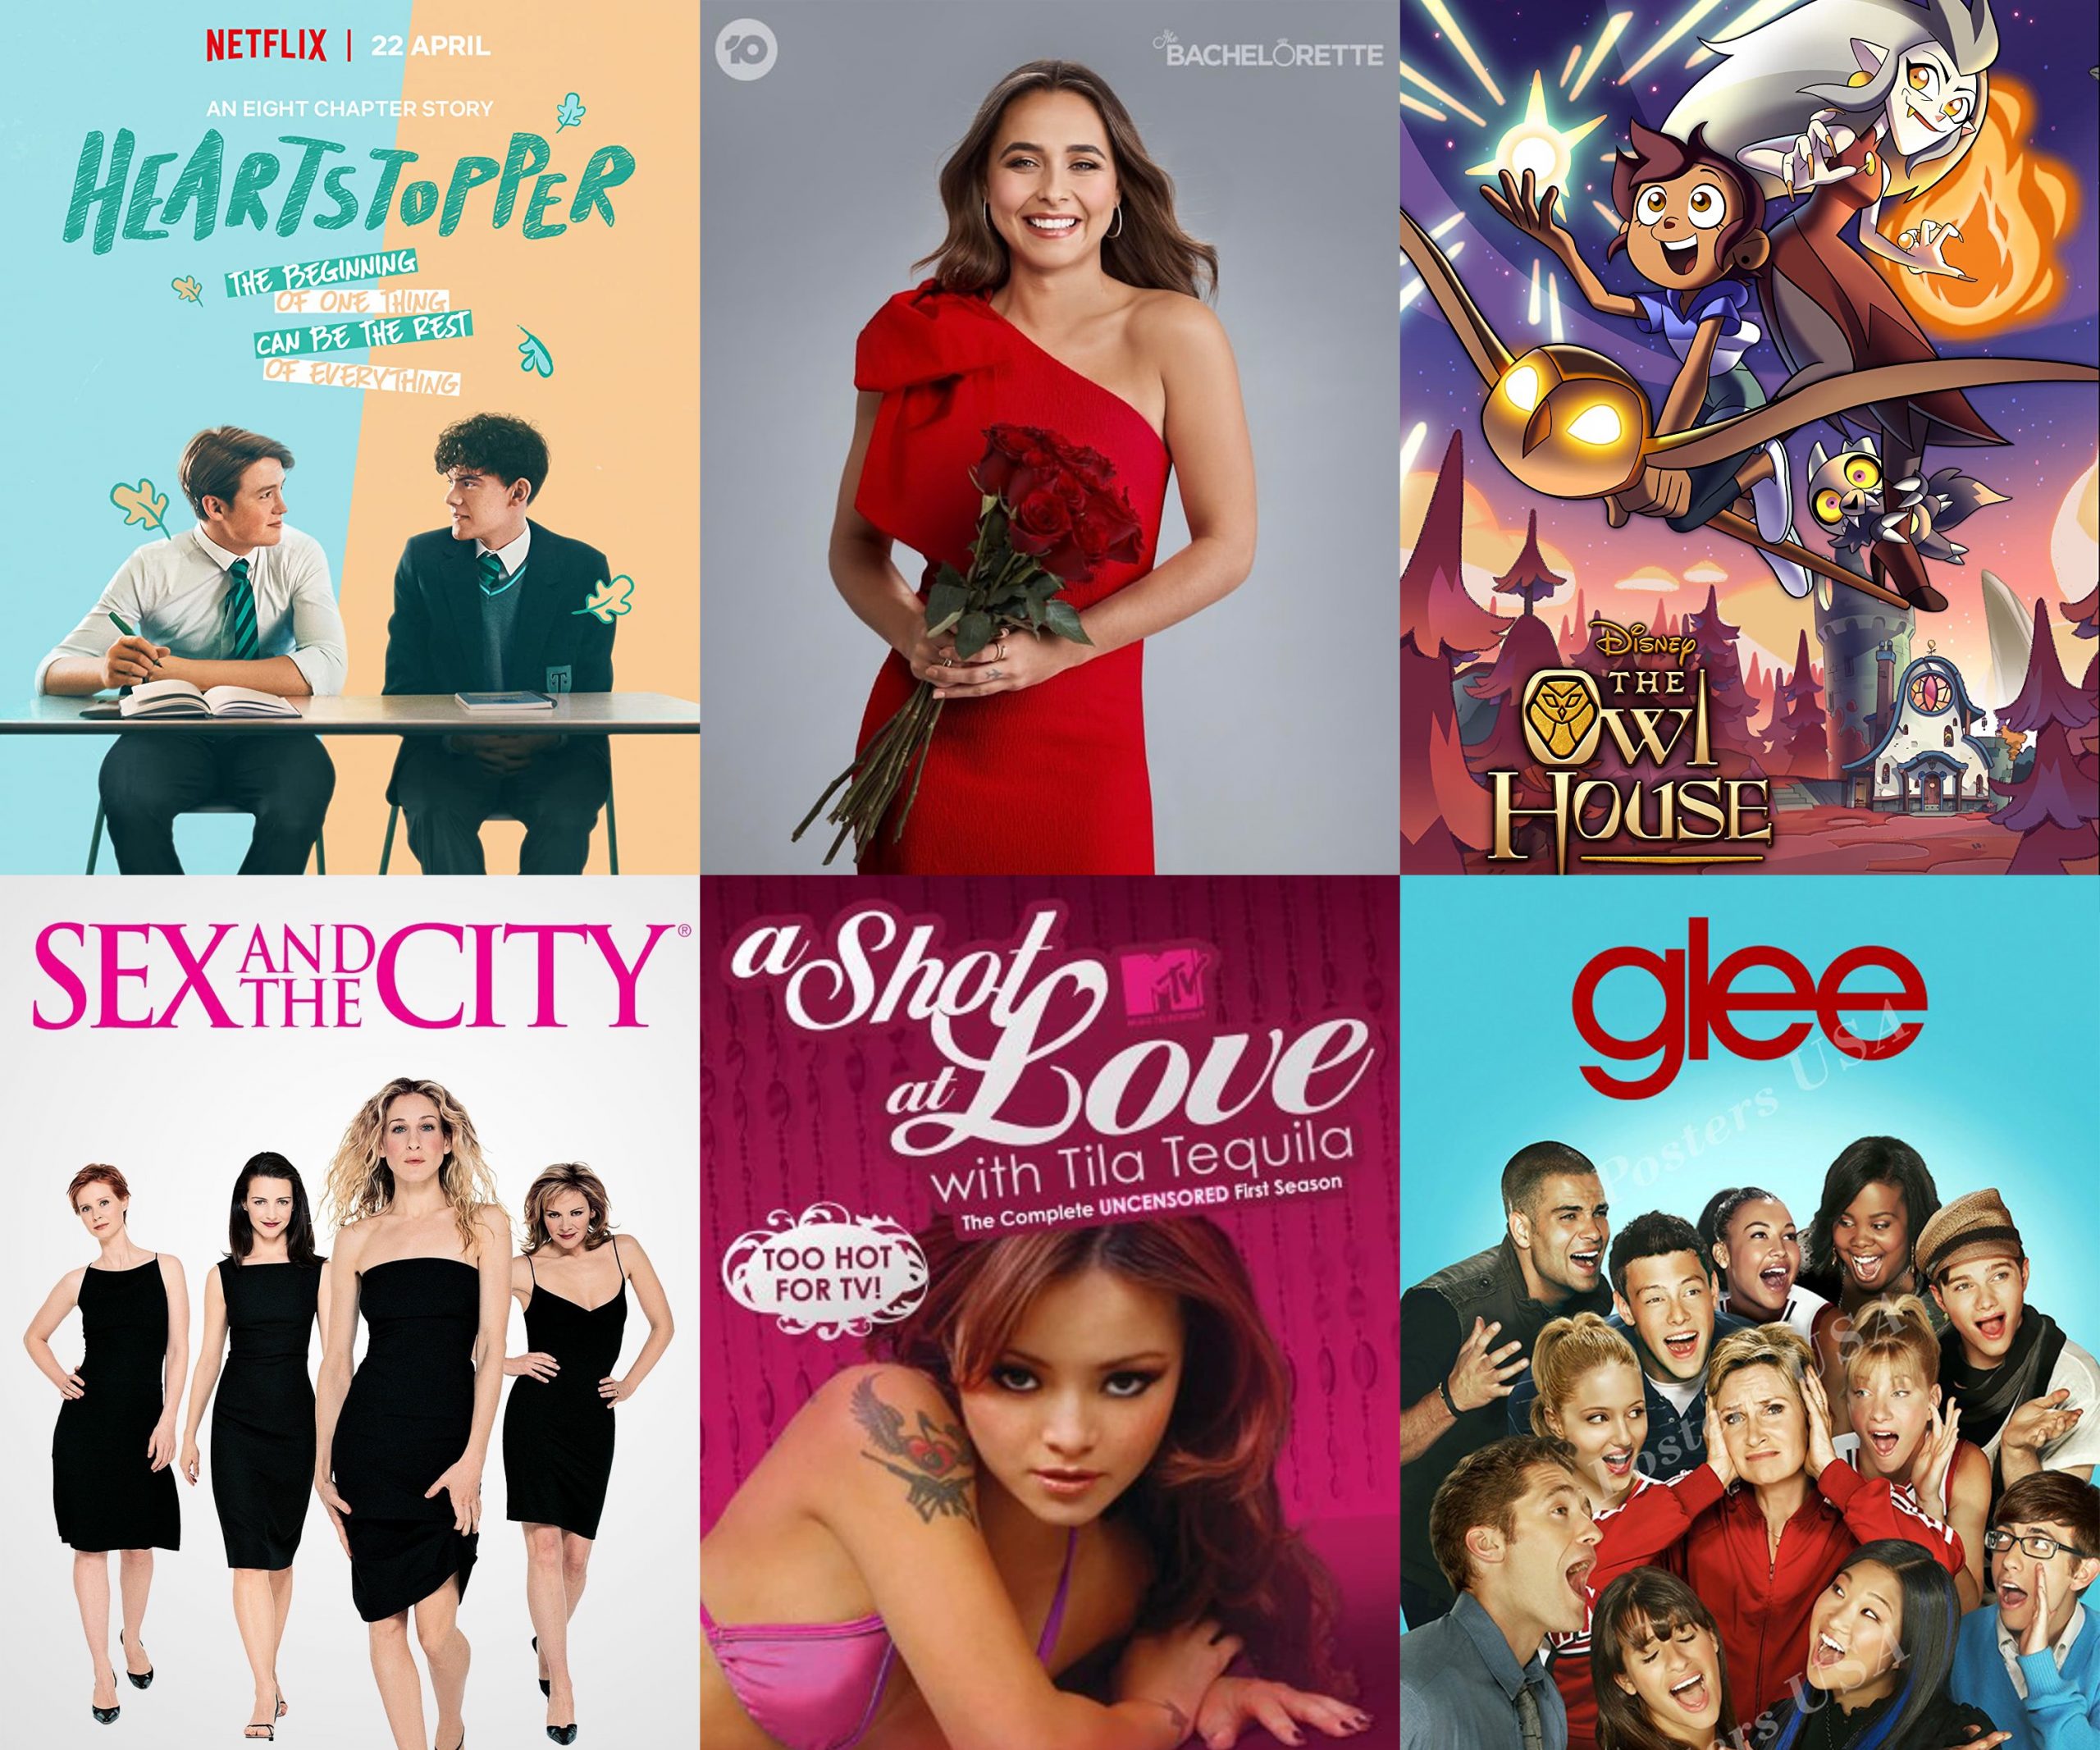 compilation of TV posters for Heartstopper, The Bachelorette Australia, The Owl House, Sex and the City, A Shot at Love with Tila Tequila, and Glee